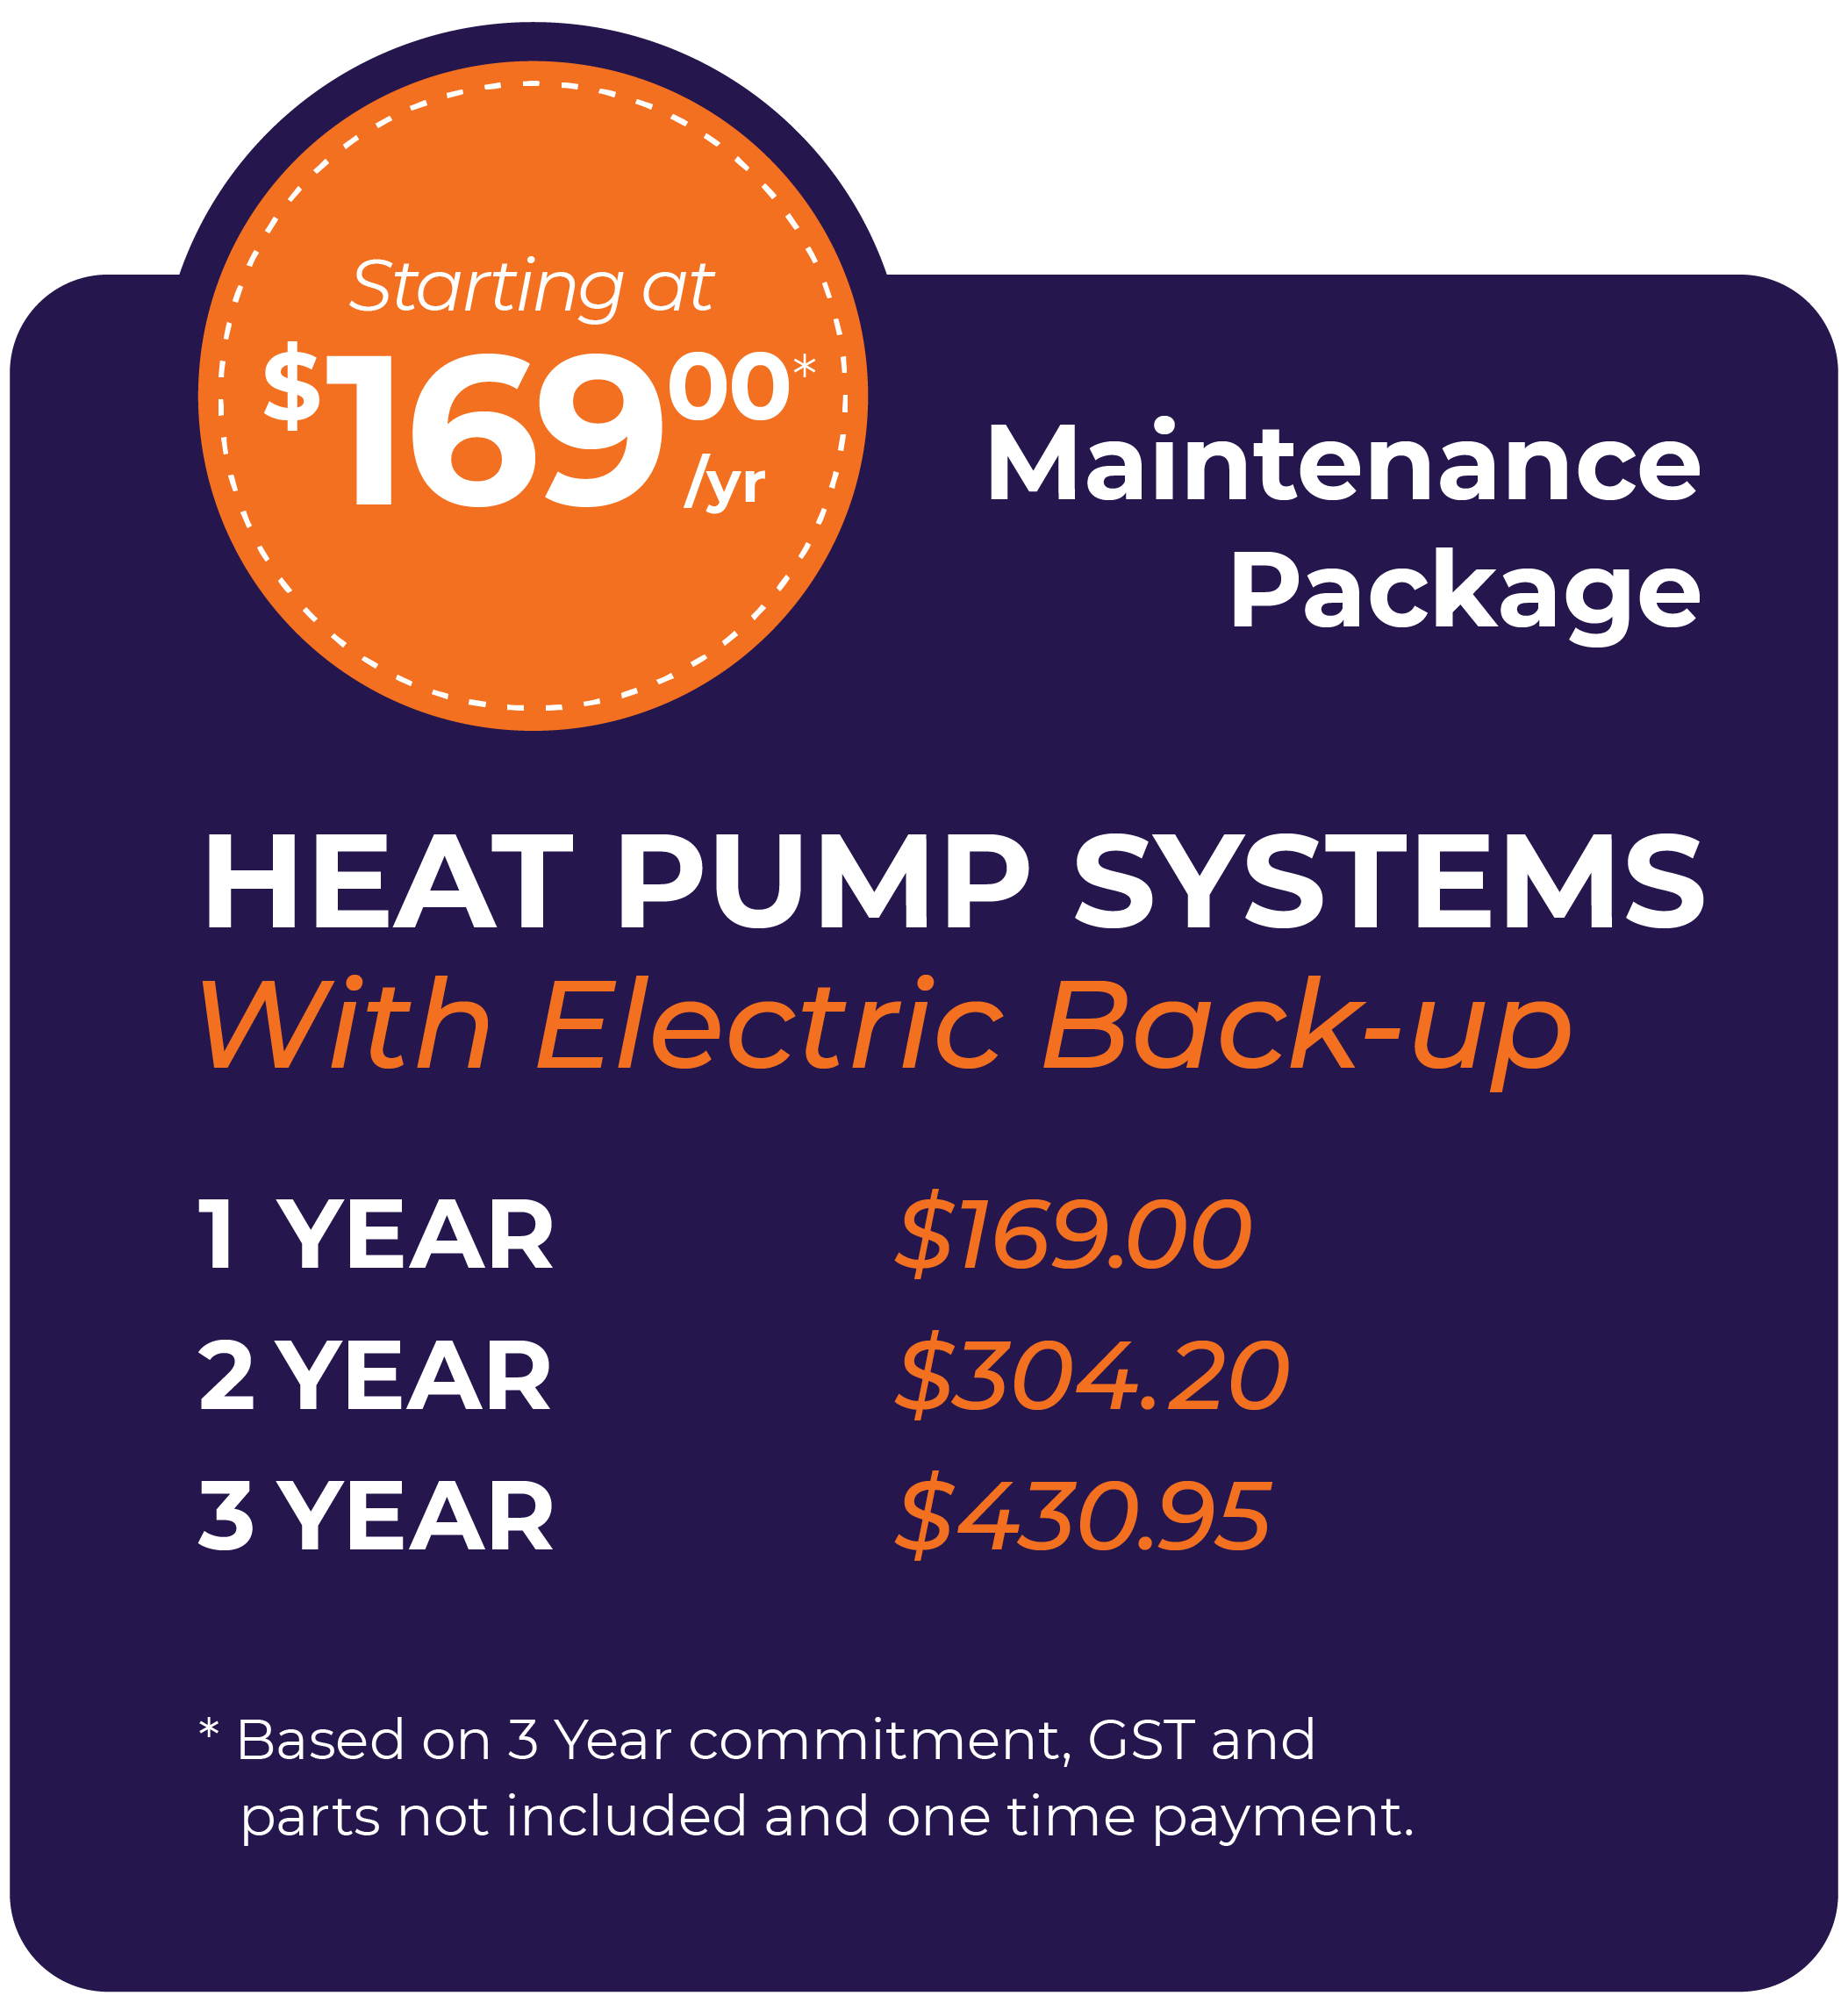 Heat Pump Systems with Electric Back-Up Maintenance